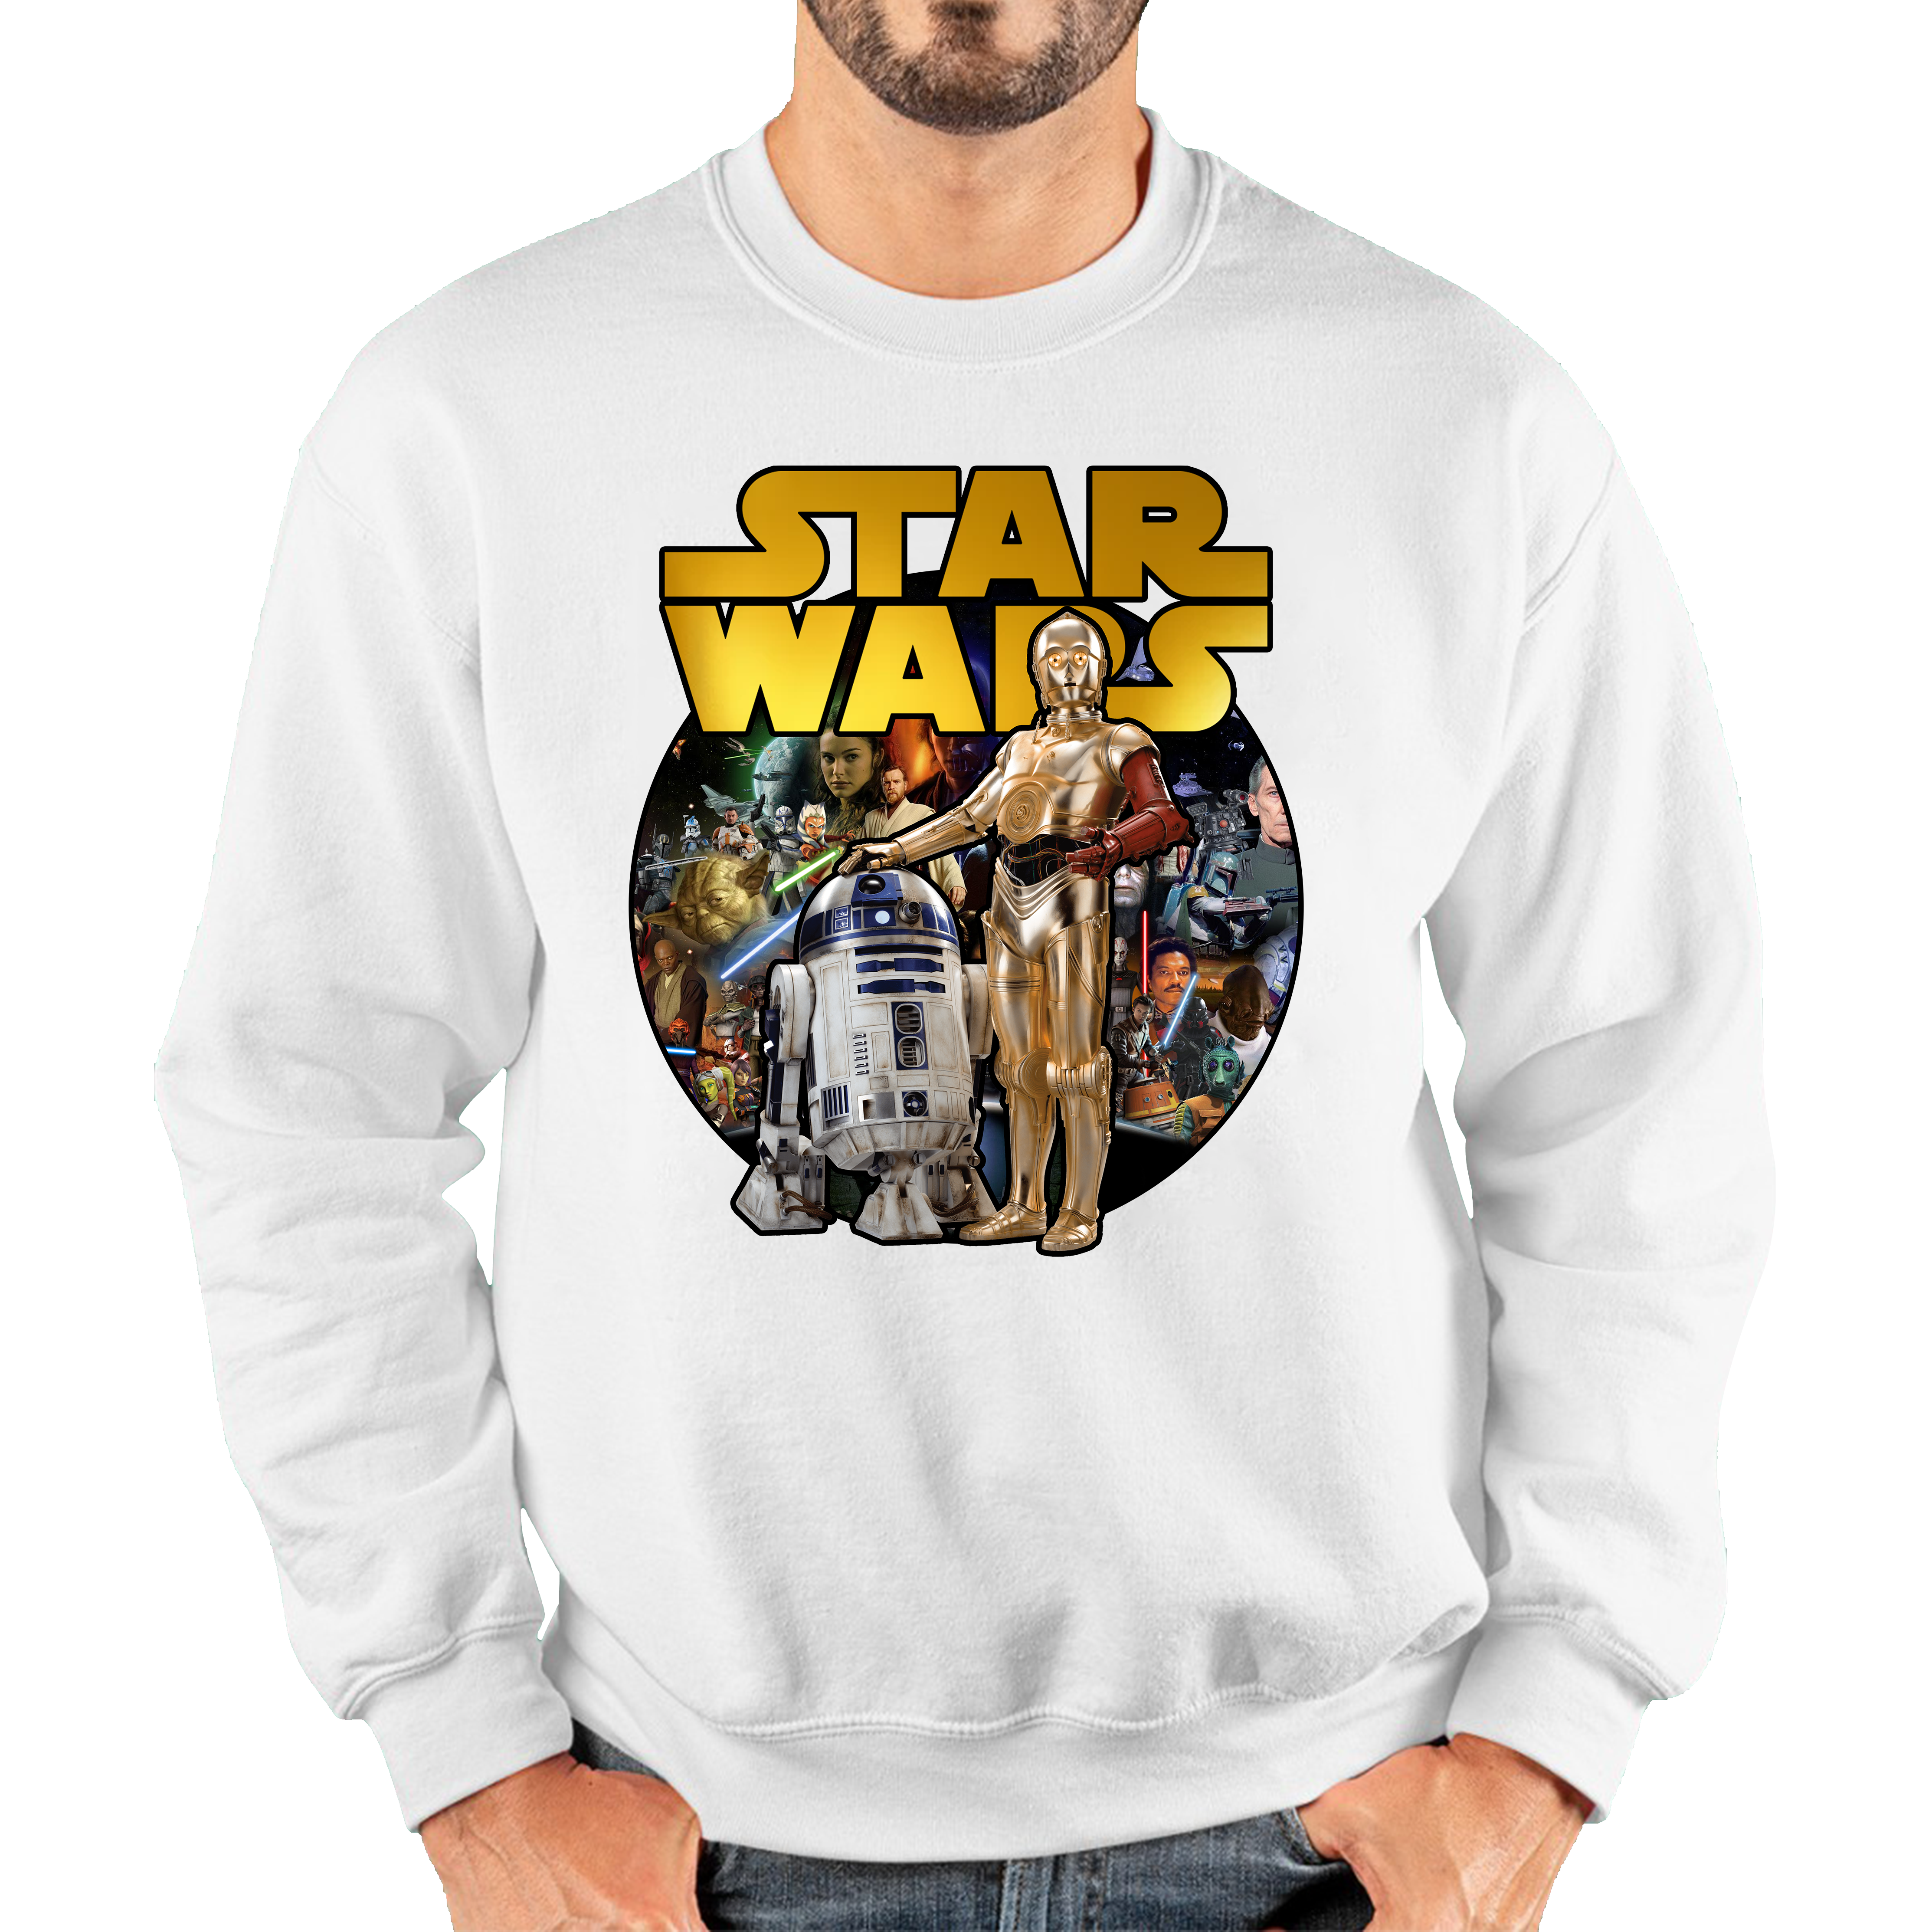 Star Wars These aren't The Droids You're Looking for Jumper Funny Star Wars R2D2 C3PO Mens Sweatshirt